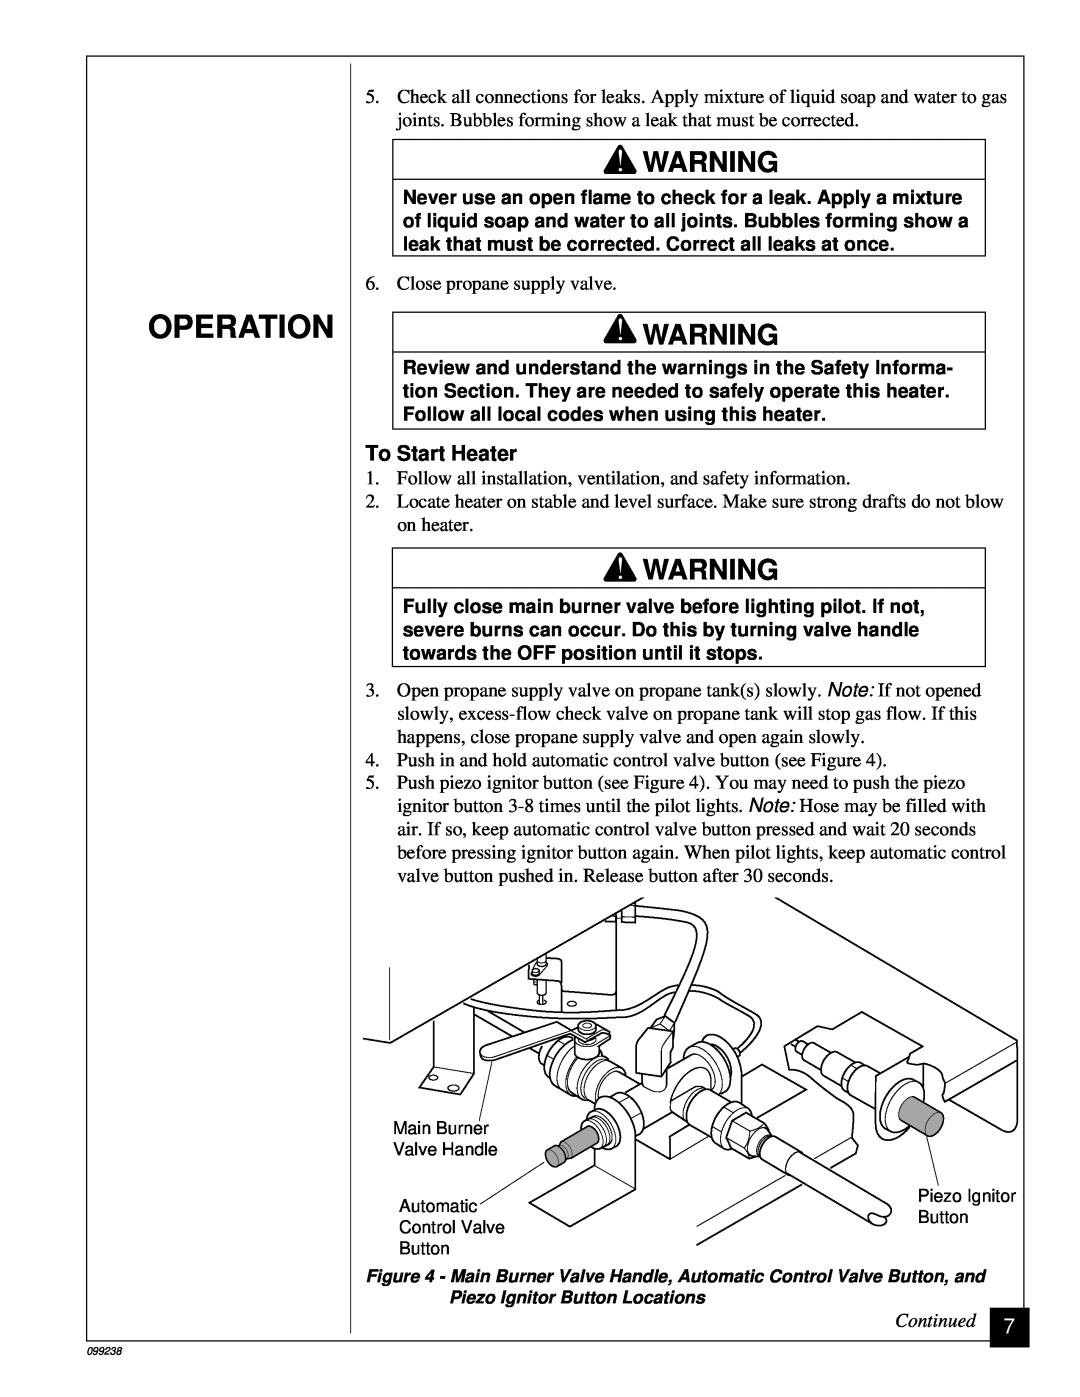 Homelite HP275 owner manual To Start Heater, Operation, Continued 